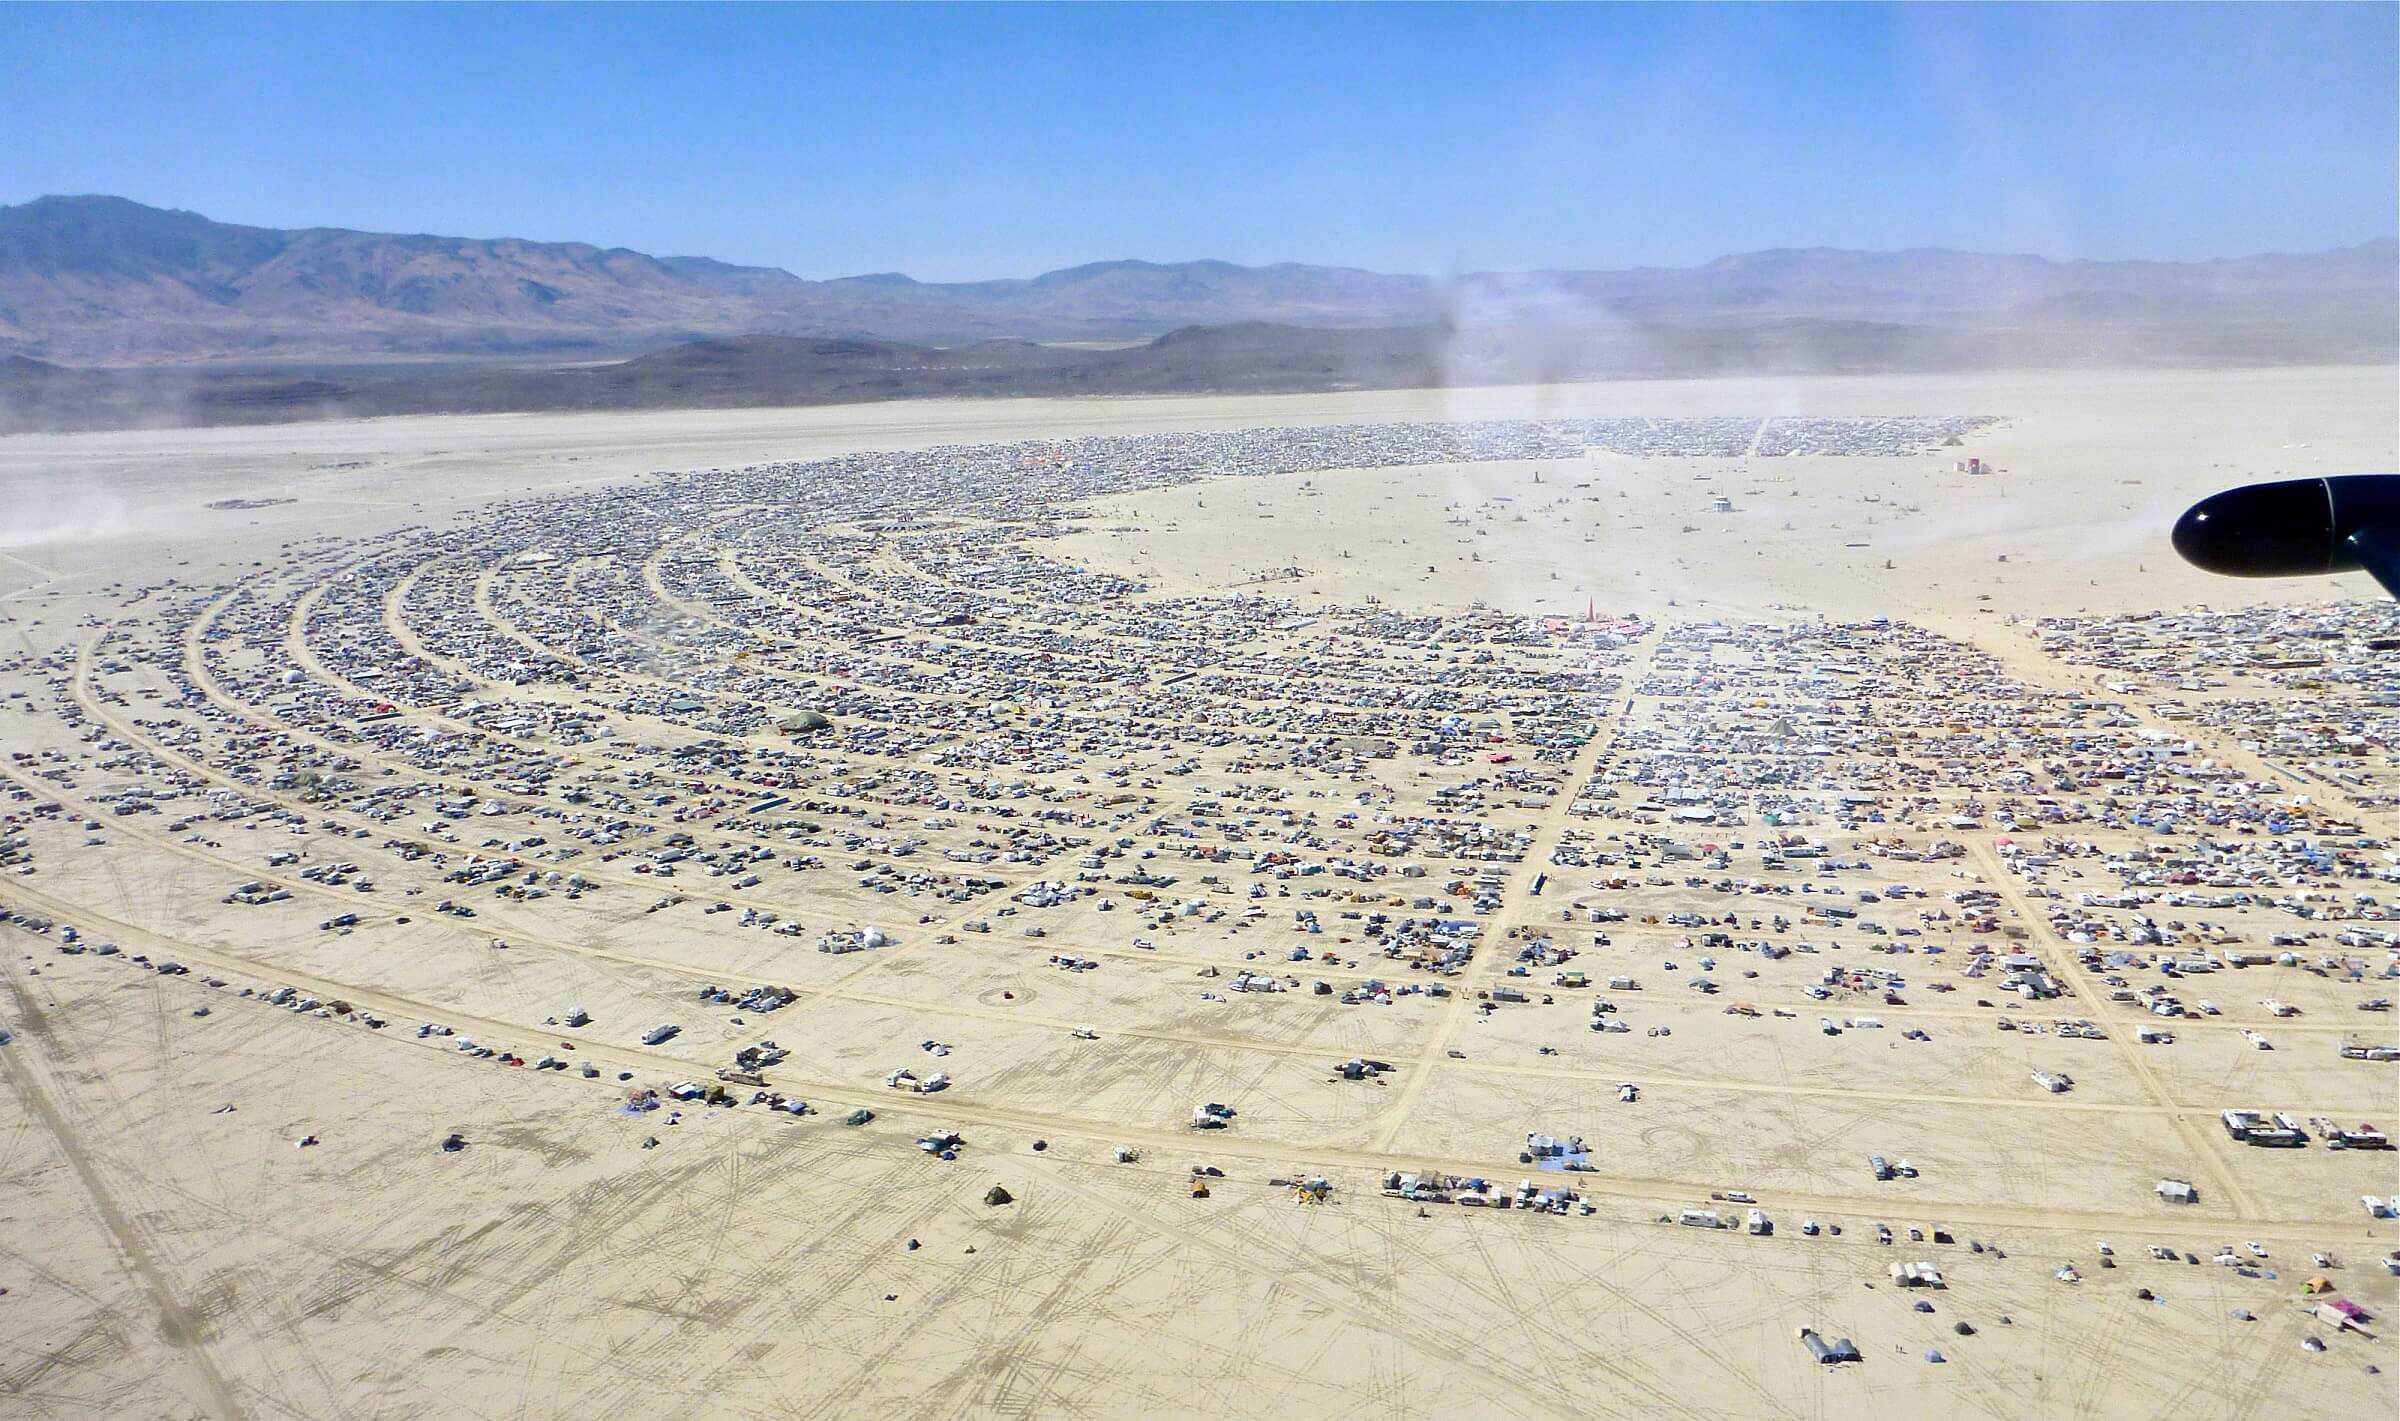 Burning Man issue updated statement amid “uncertain weather front”